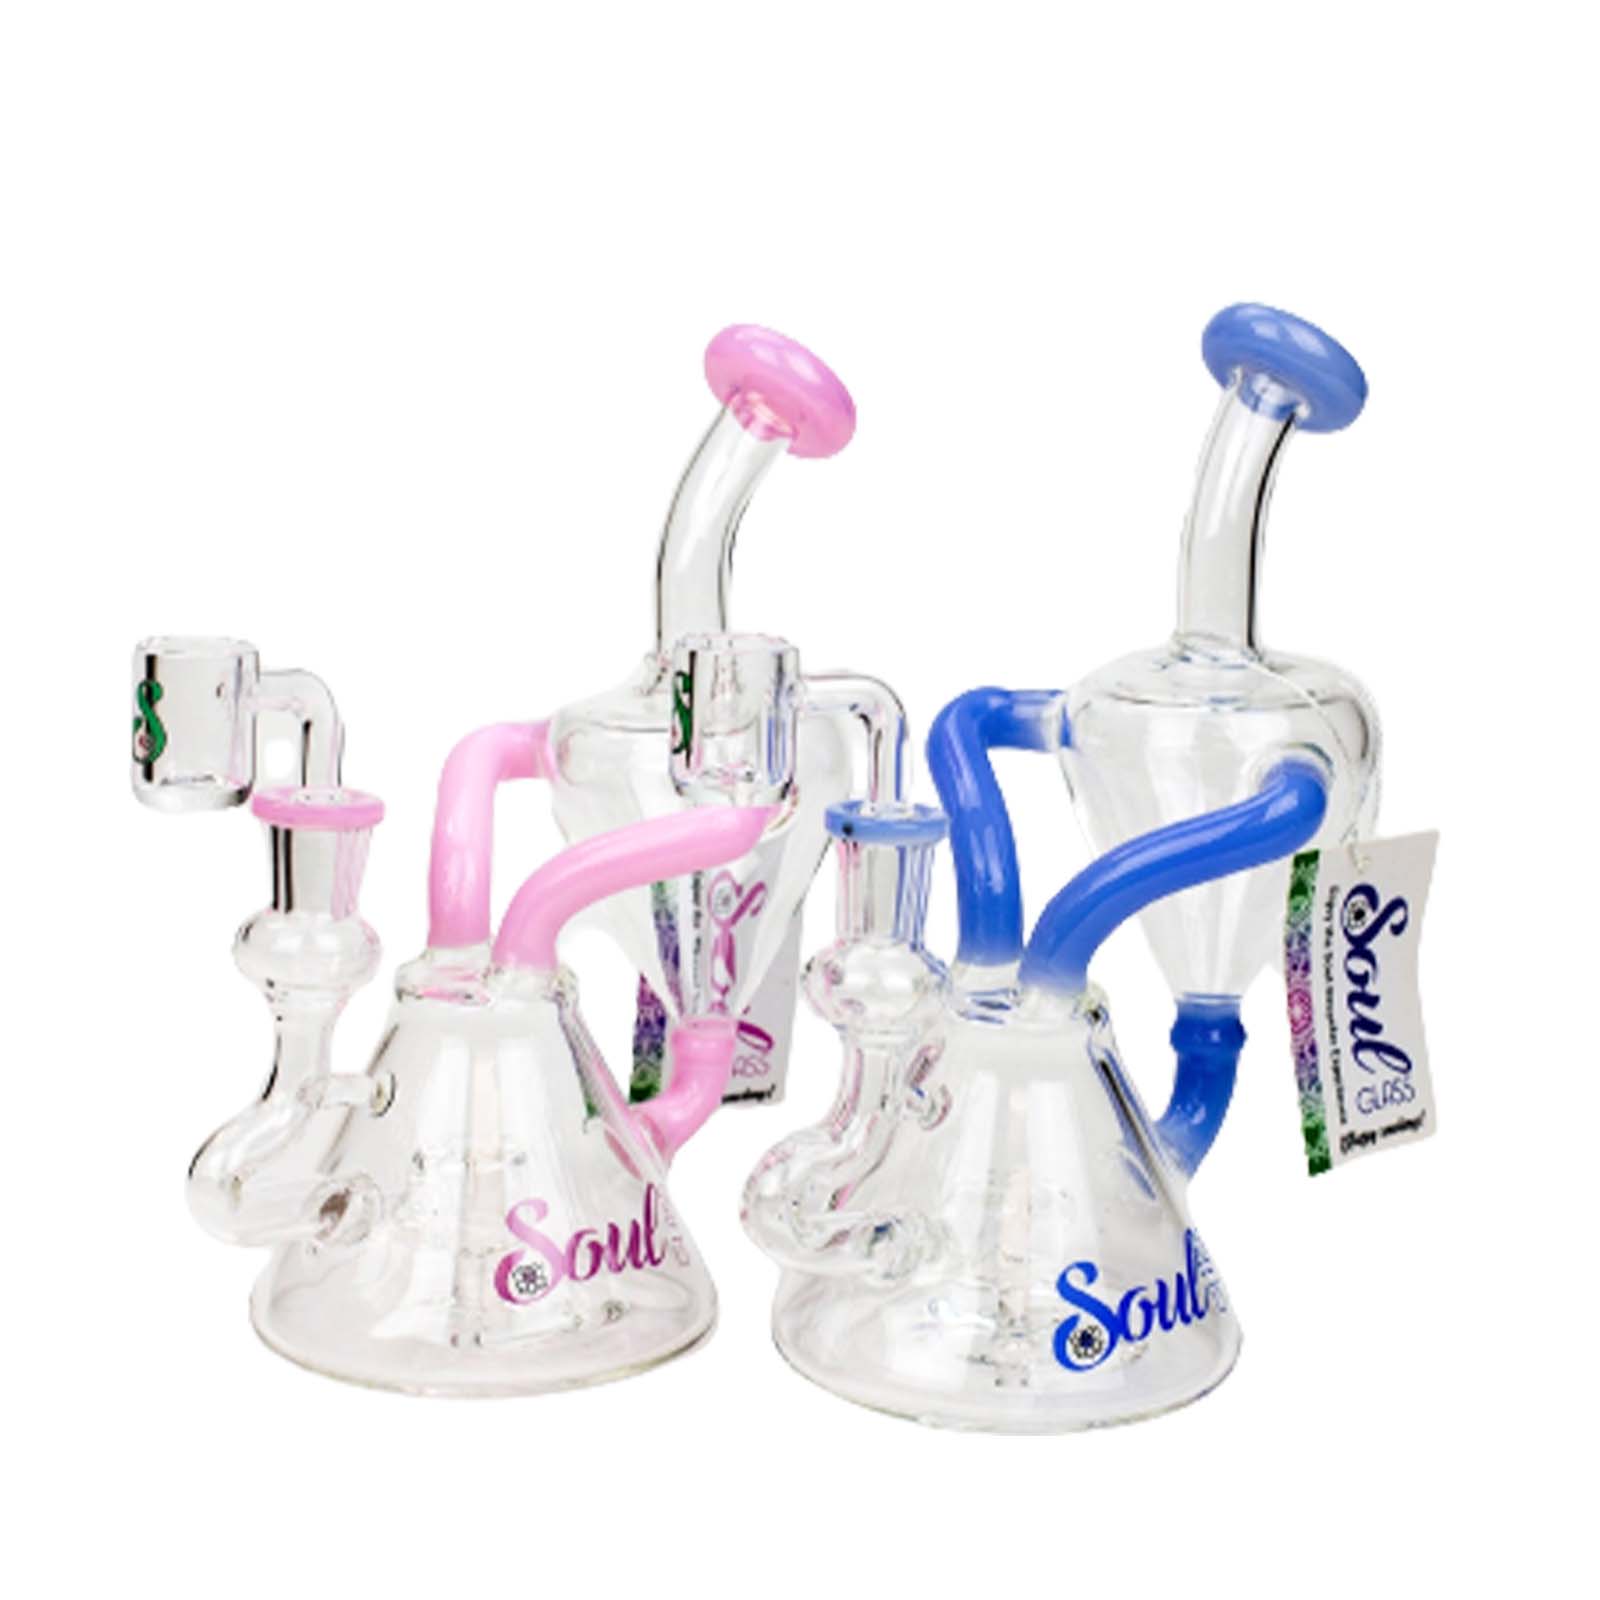 8" SOUL 2-in-1 Single Chamber Recycler Rig